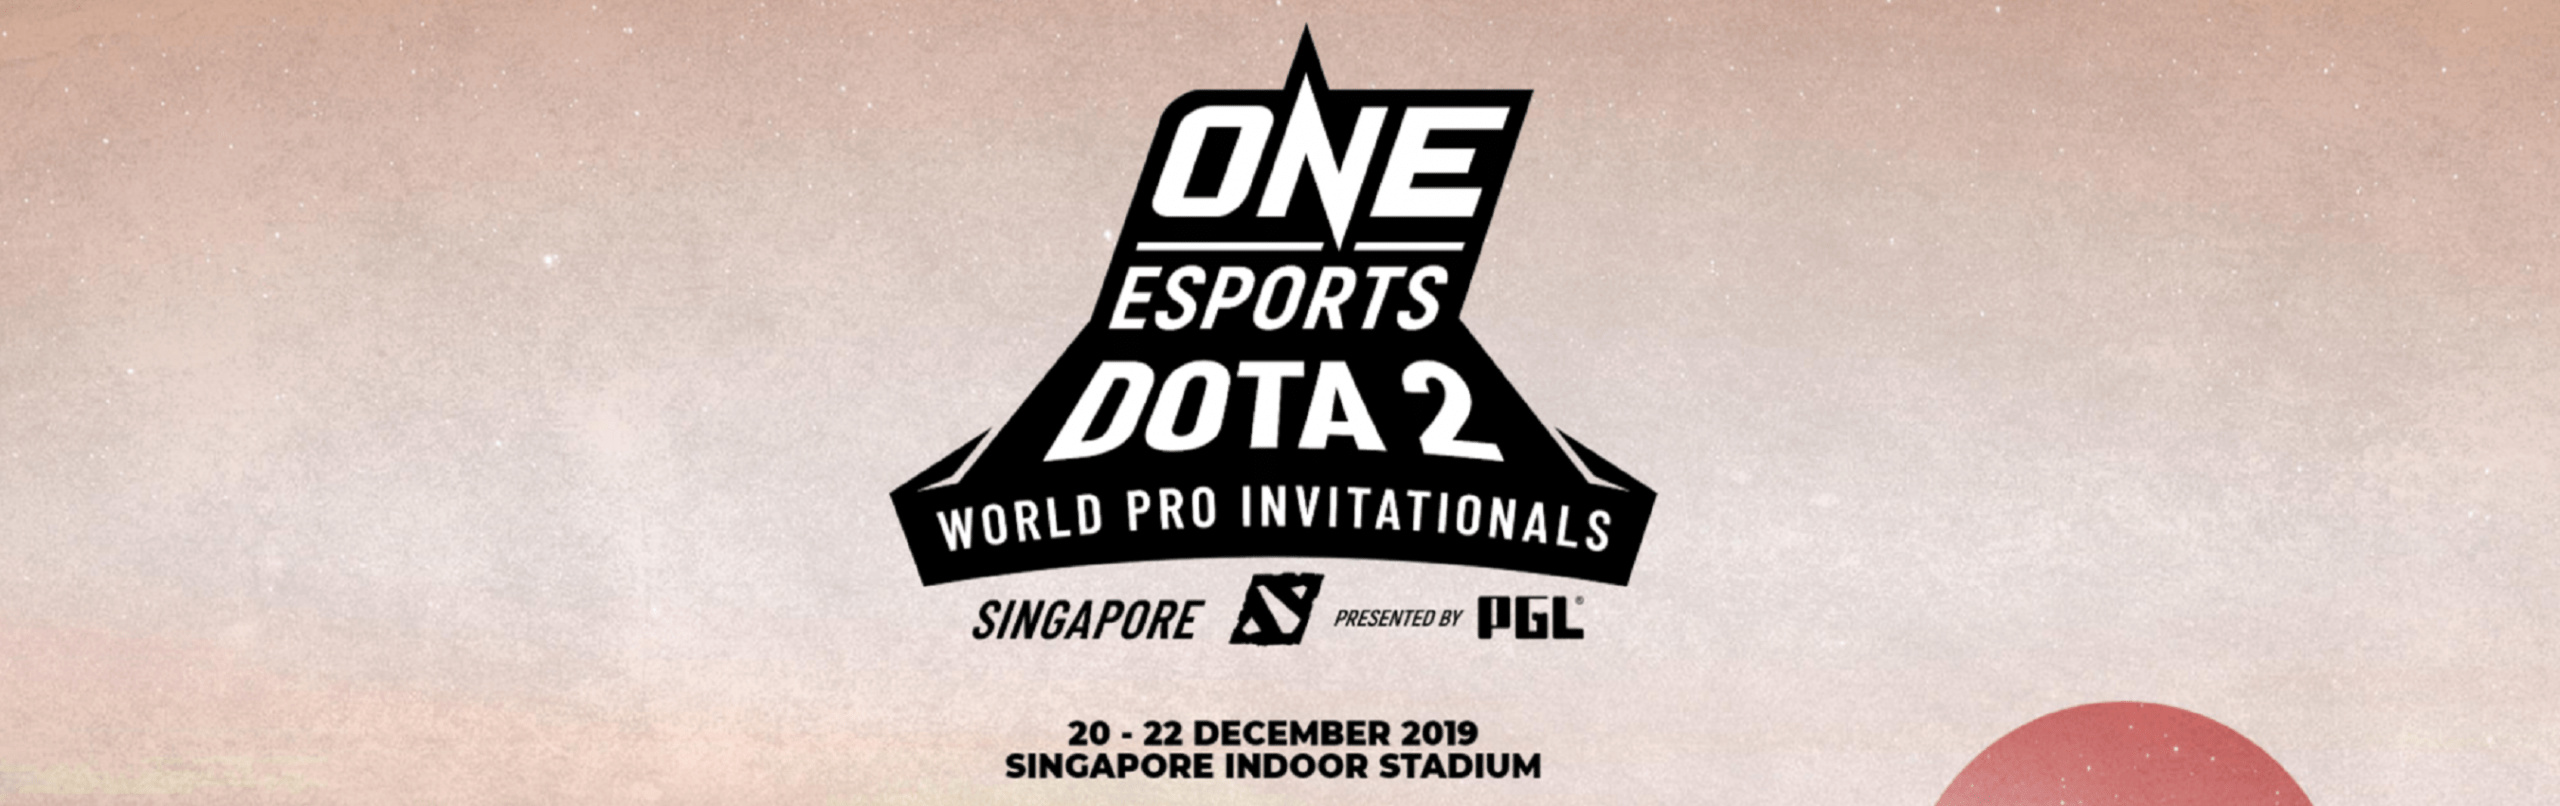 One Esports Dota 2 World Pro Invitational Is A Month Away, Featuring The Best Dota 2 Teams In The World